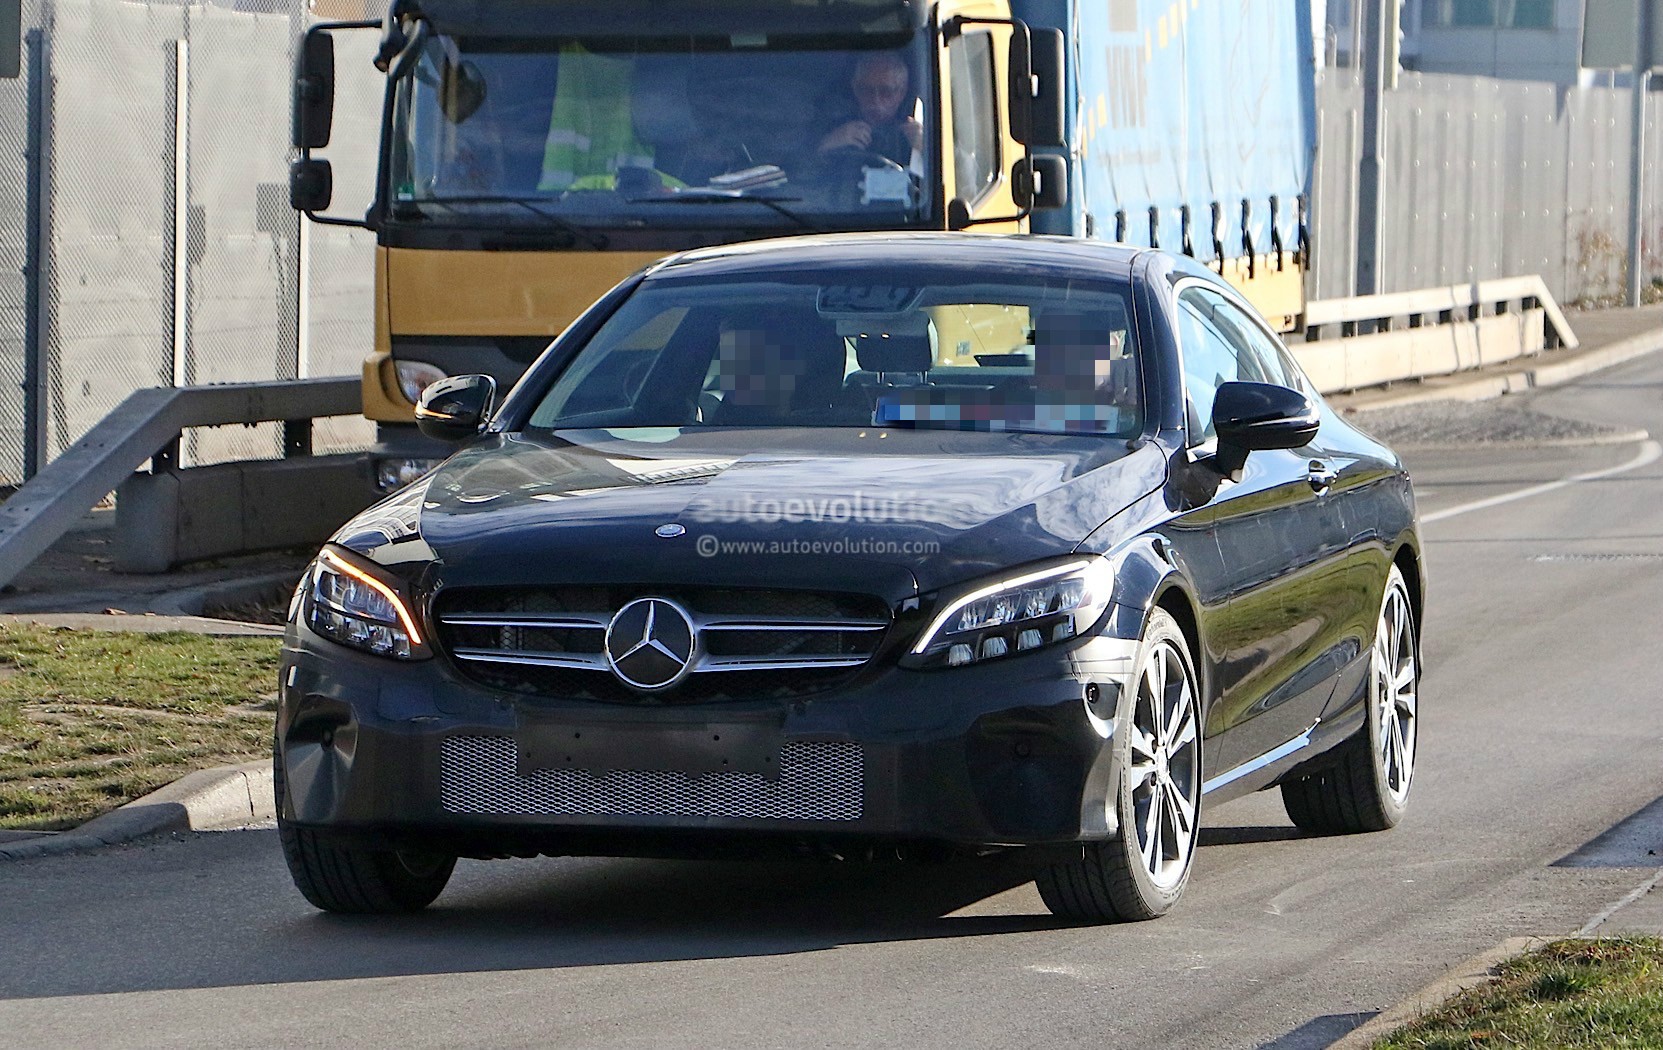 2019 Mercedes-Benz C-Class Coupe Facelift Shows All-New ...